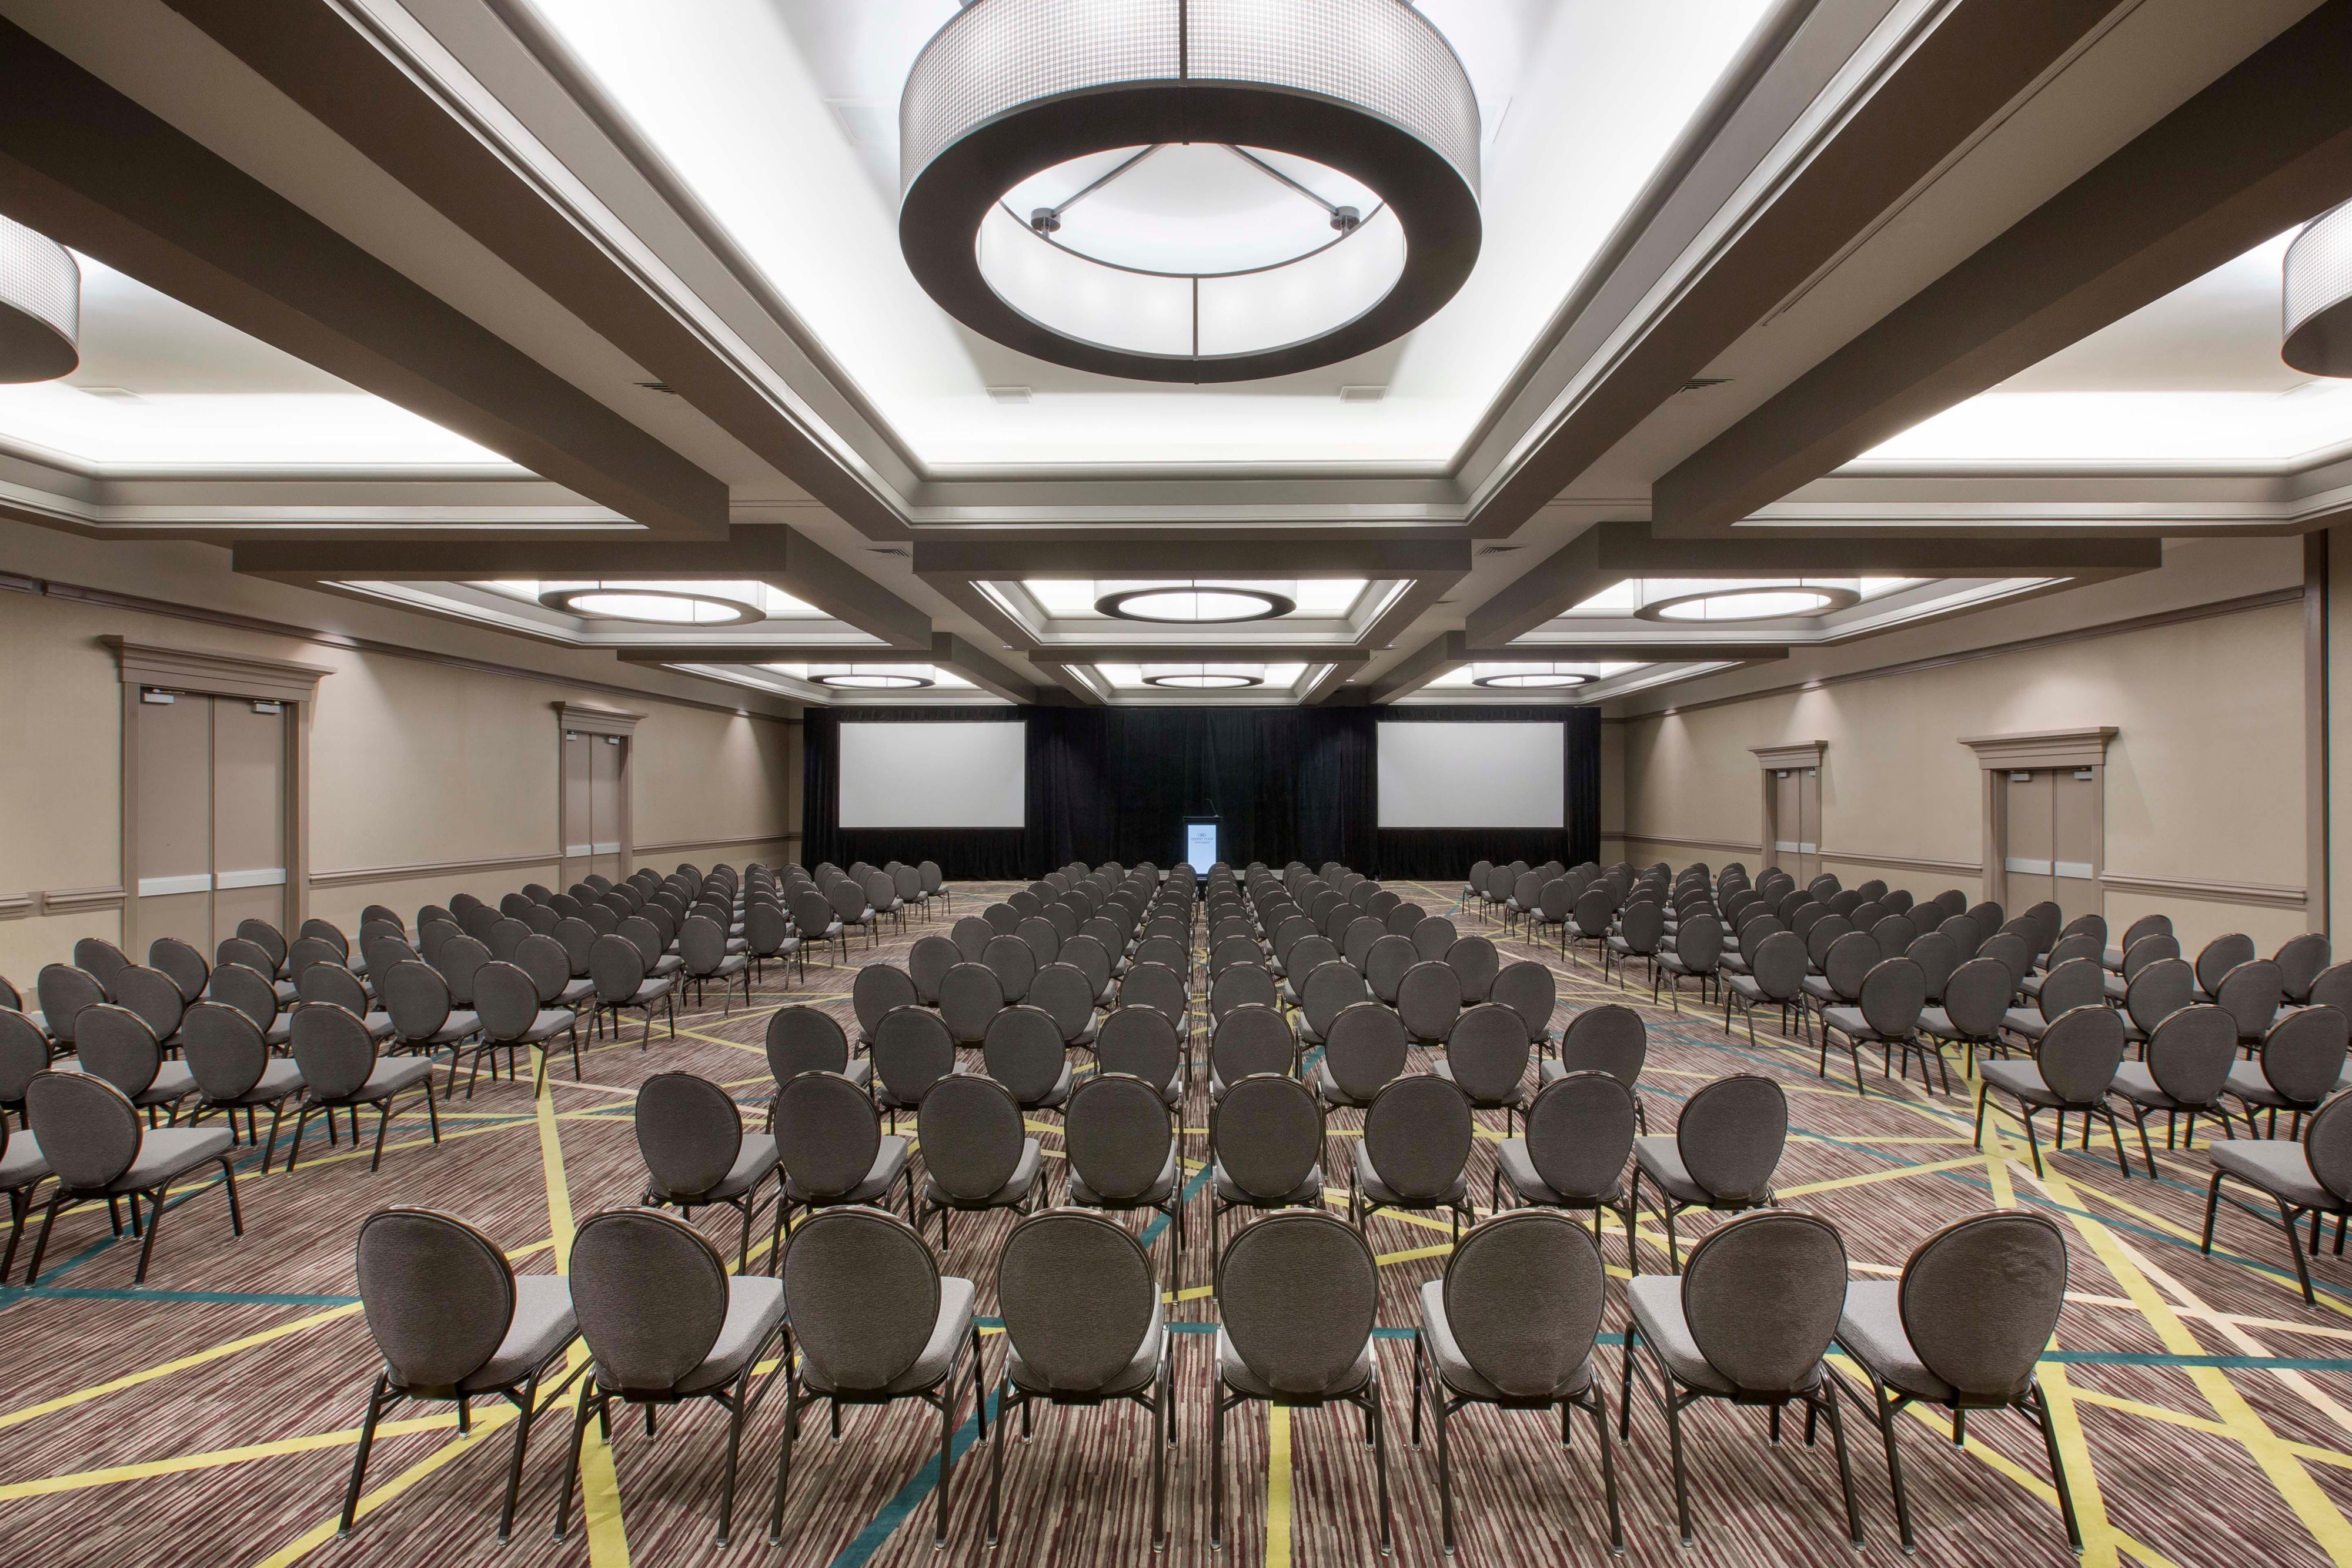 Our flexible event space offers configurations for events of any size.